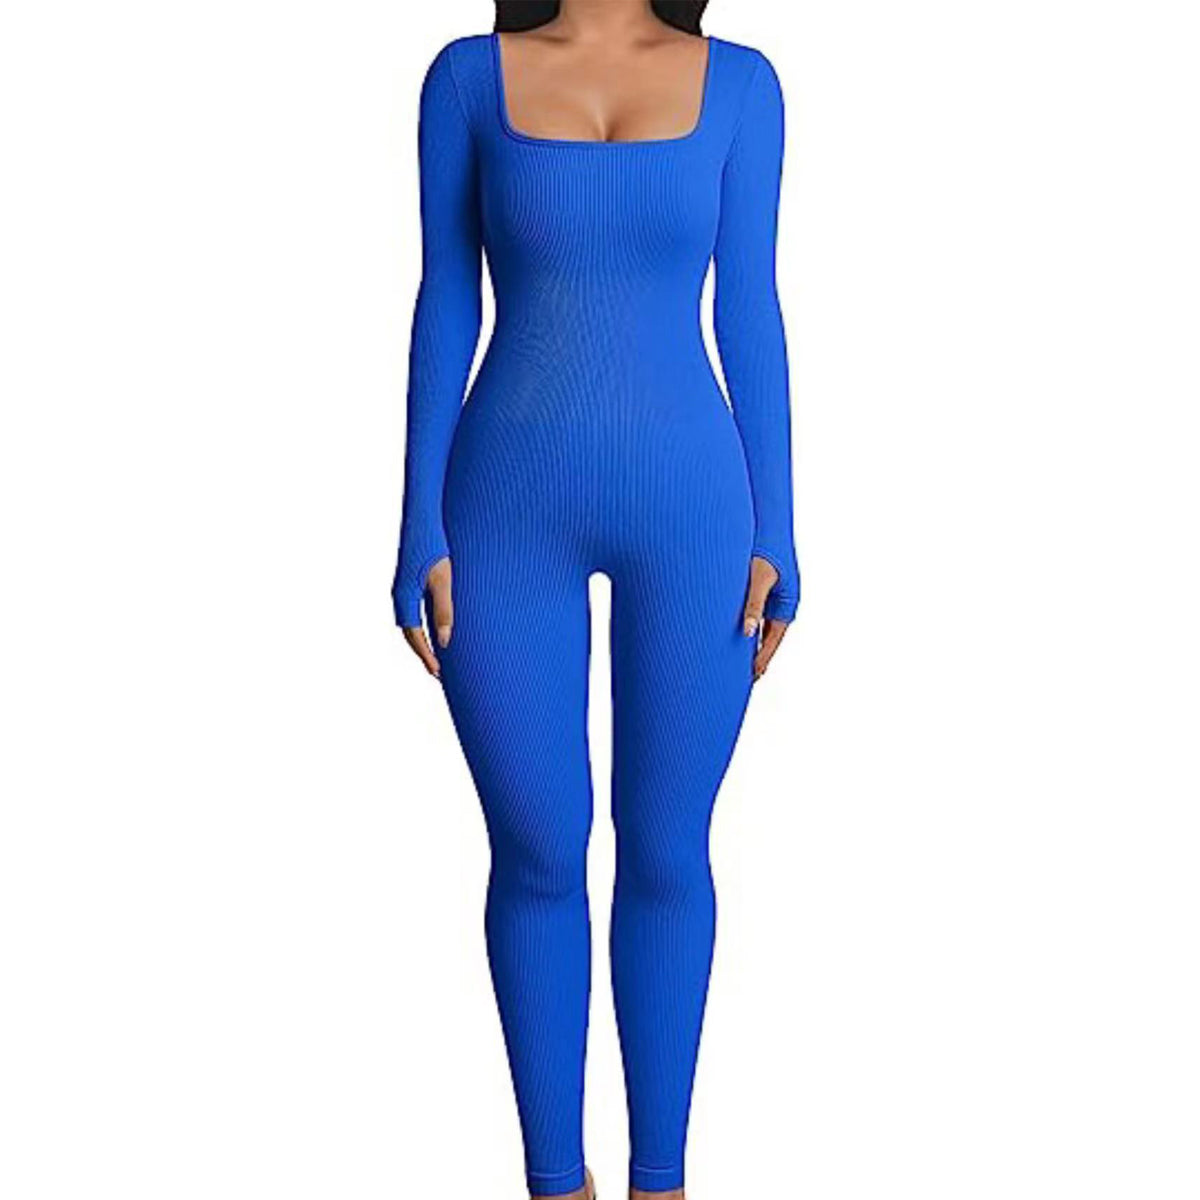 Jumpsuit  | Urban Chic: One-Piece Thread Bodysuit in Dazzling Colors – Sizes S to 3XL | 2XL |  Blue| thecurvestory.myshopify.com